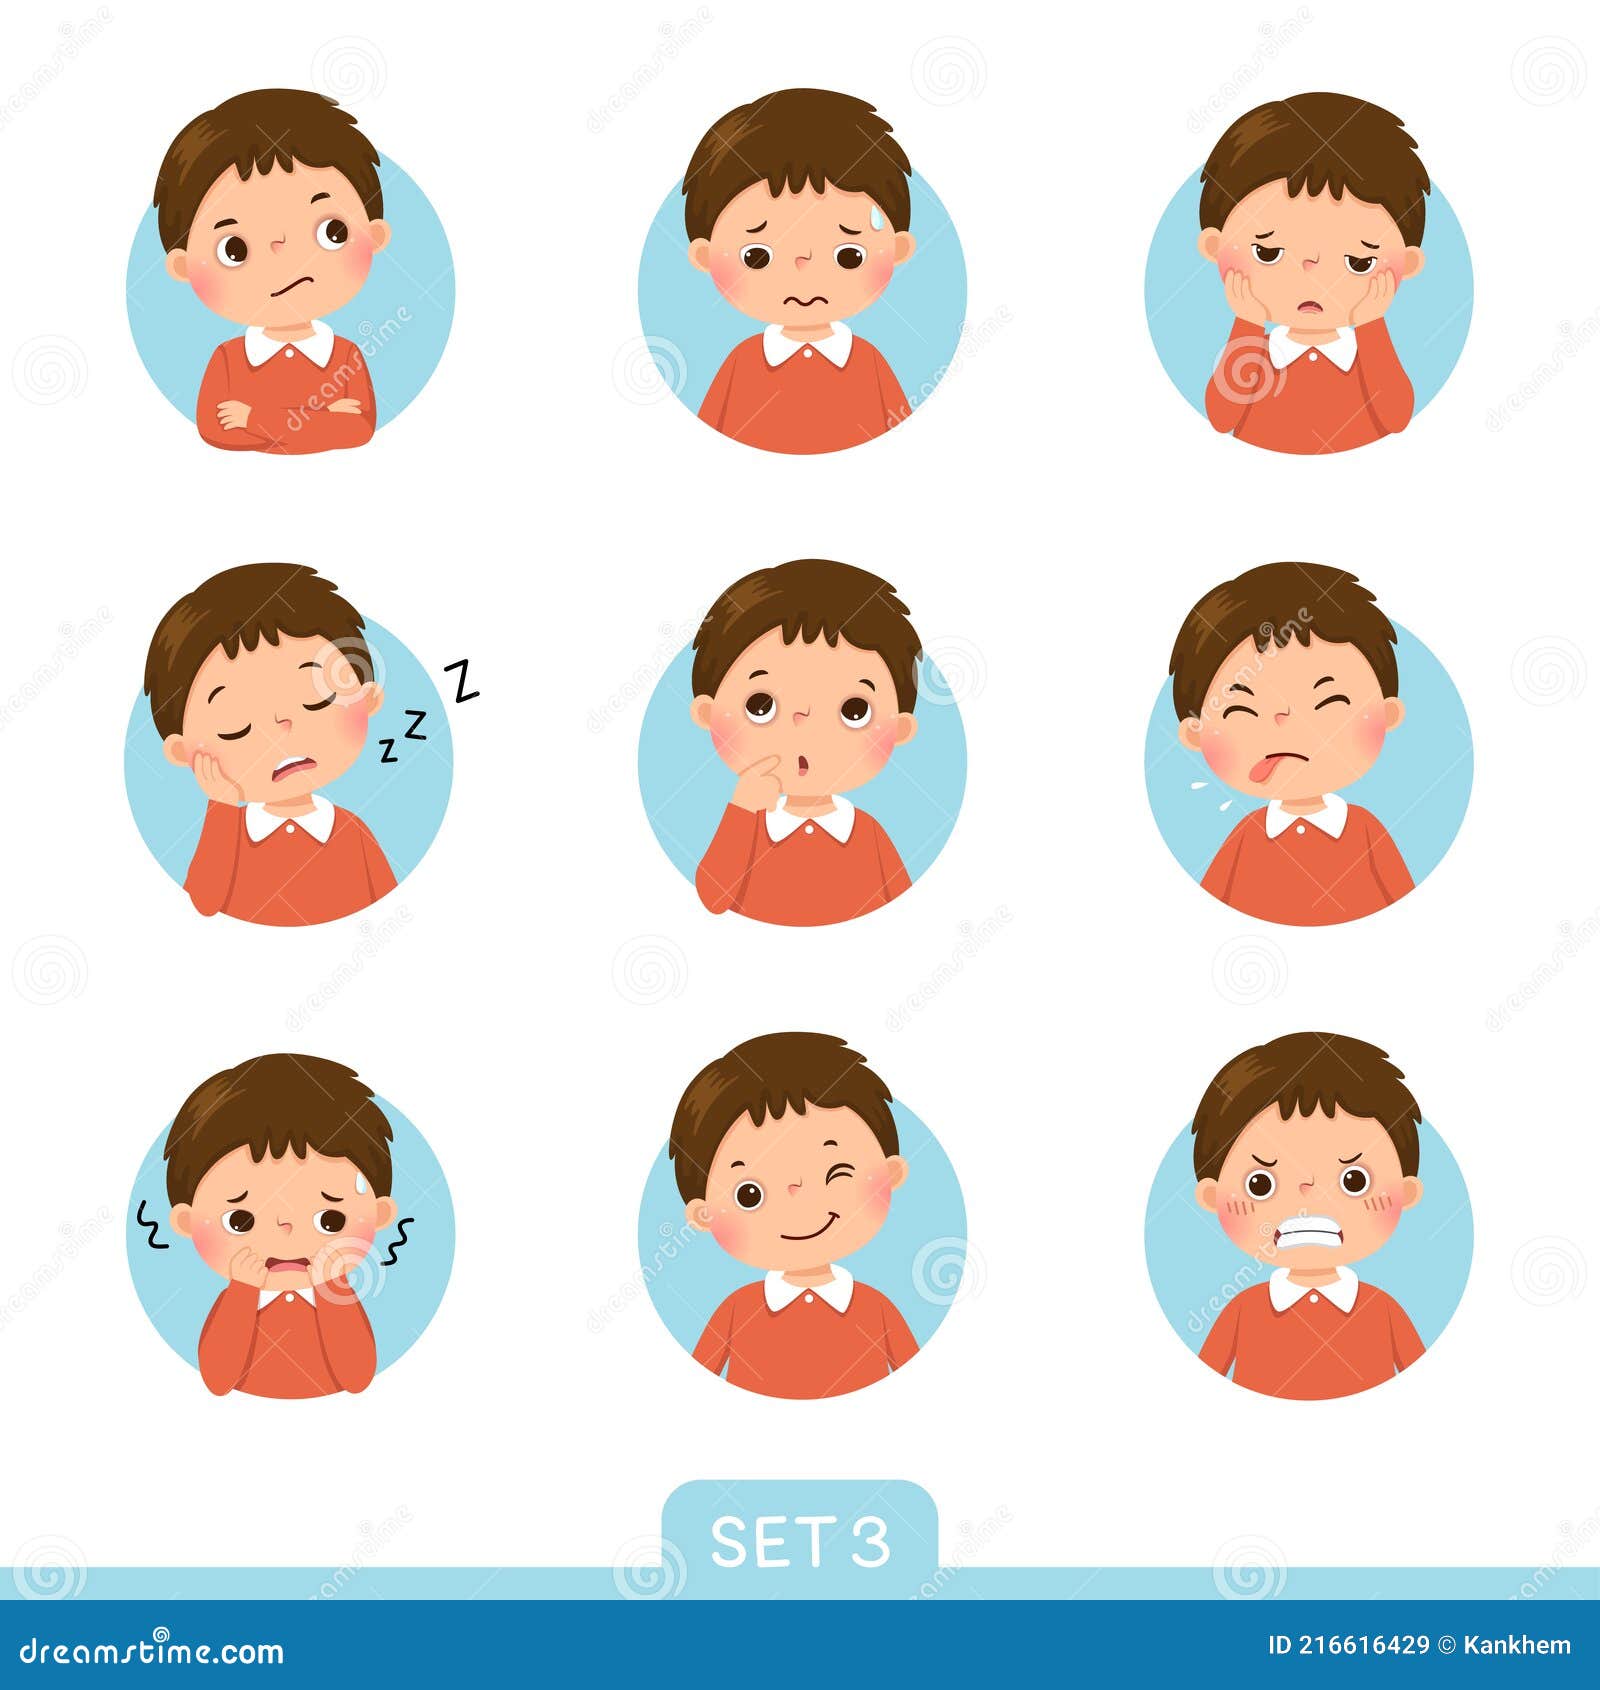 cartoon set of a little boy in different postures with various emotions. set 3 of 3